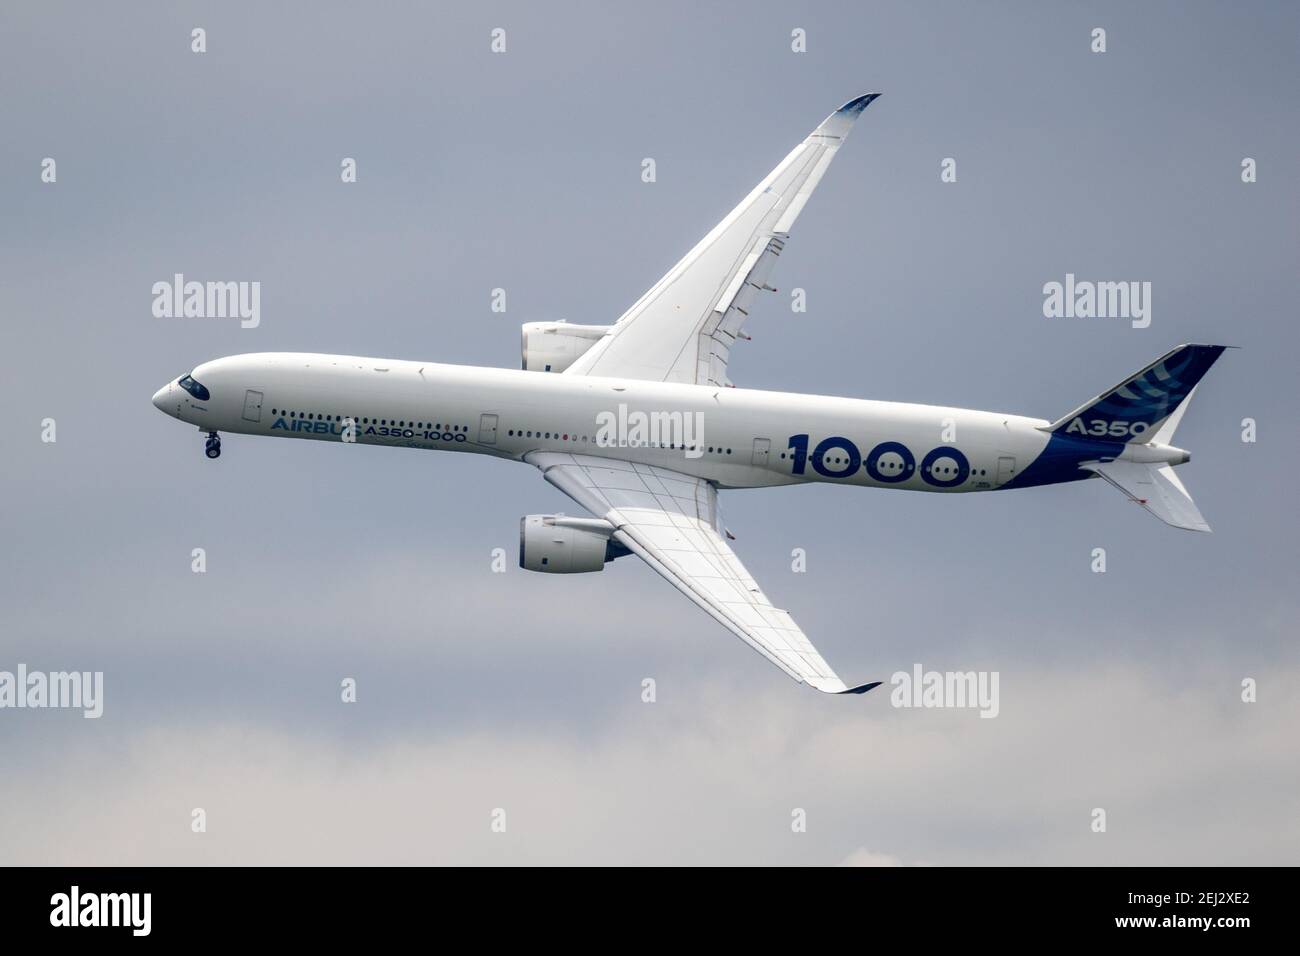 Airbus A350-1000 XWB airliner plane performing at the Paris Air Show. France - June 20, 2019 Stock Photo